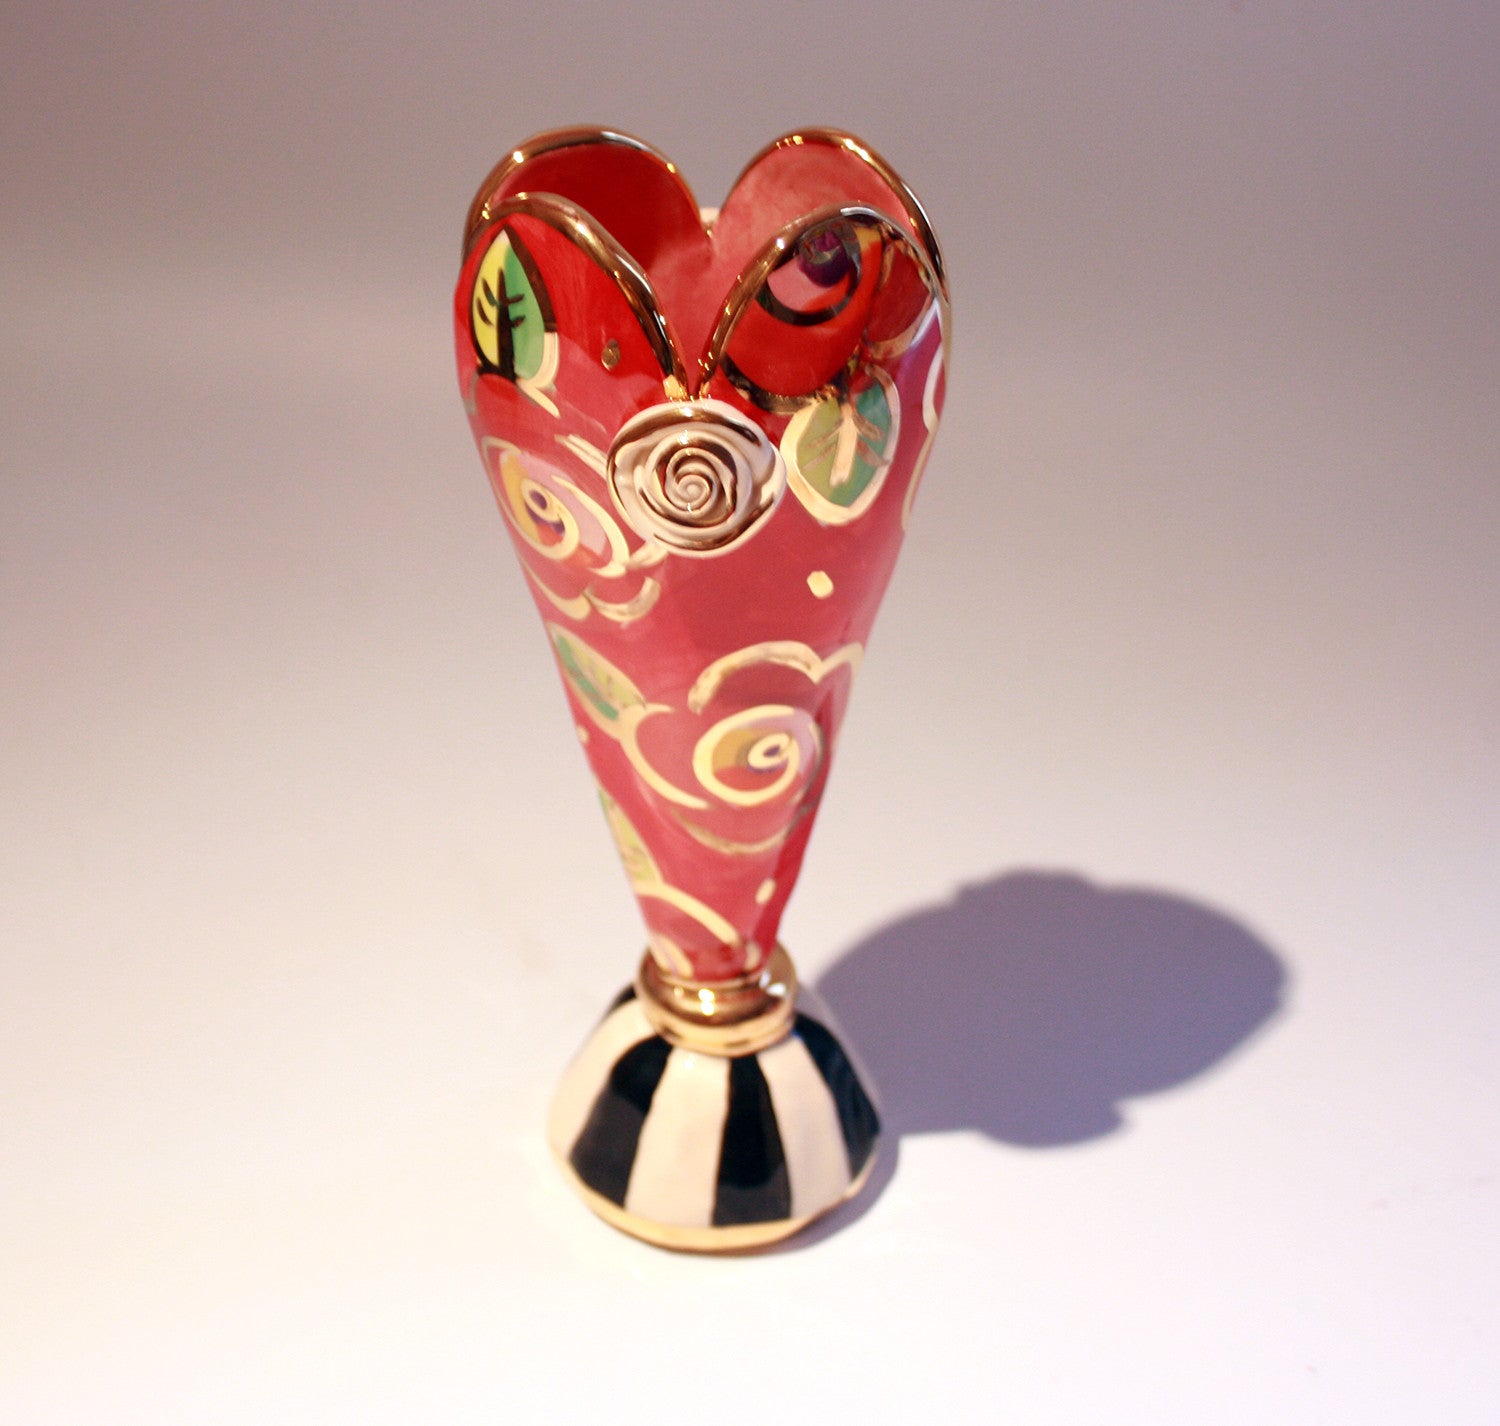 Tiny Heart Vase "New Red New Rose" - MaryRoseYoung